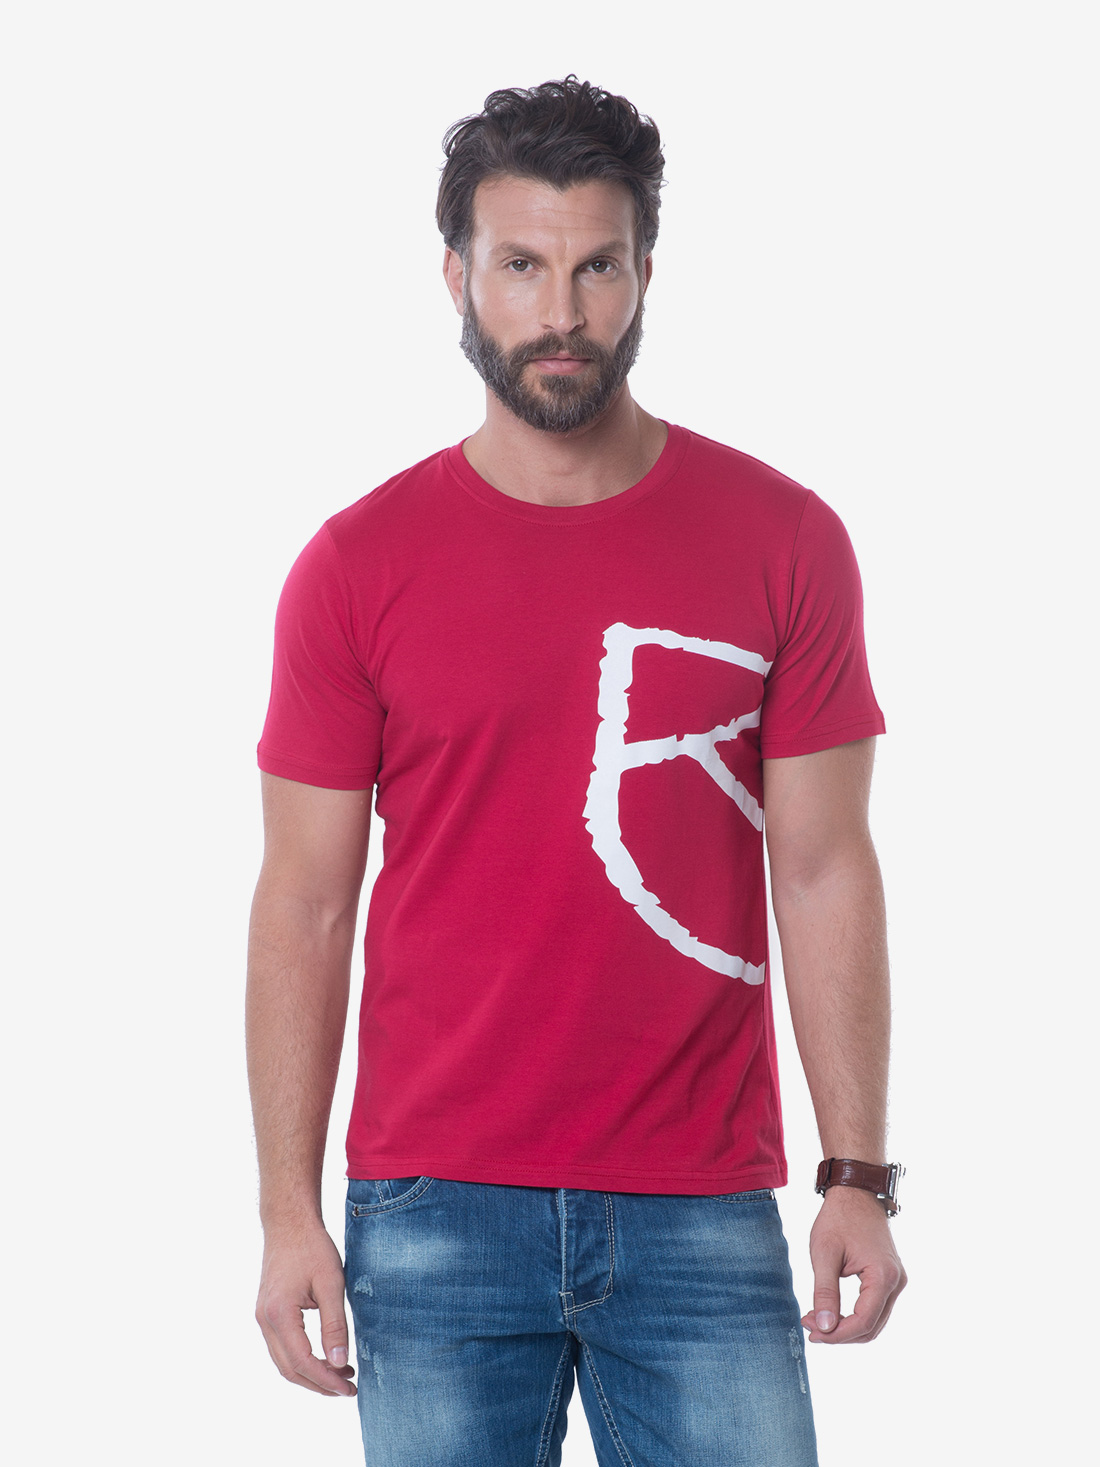 Slim Fit Red T-shirt - Kal Jacobs